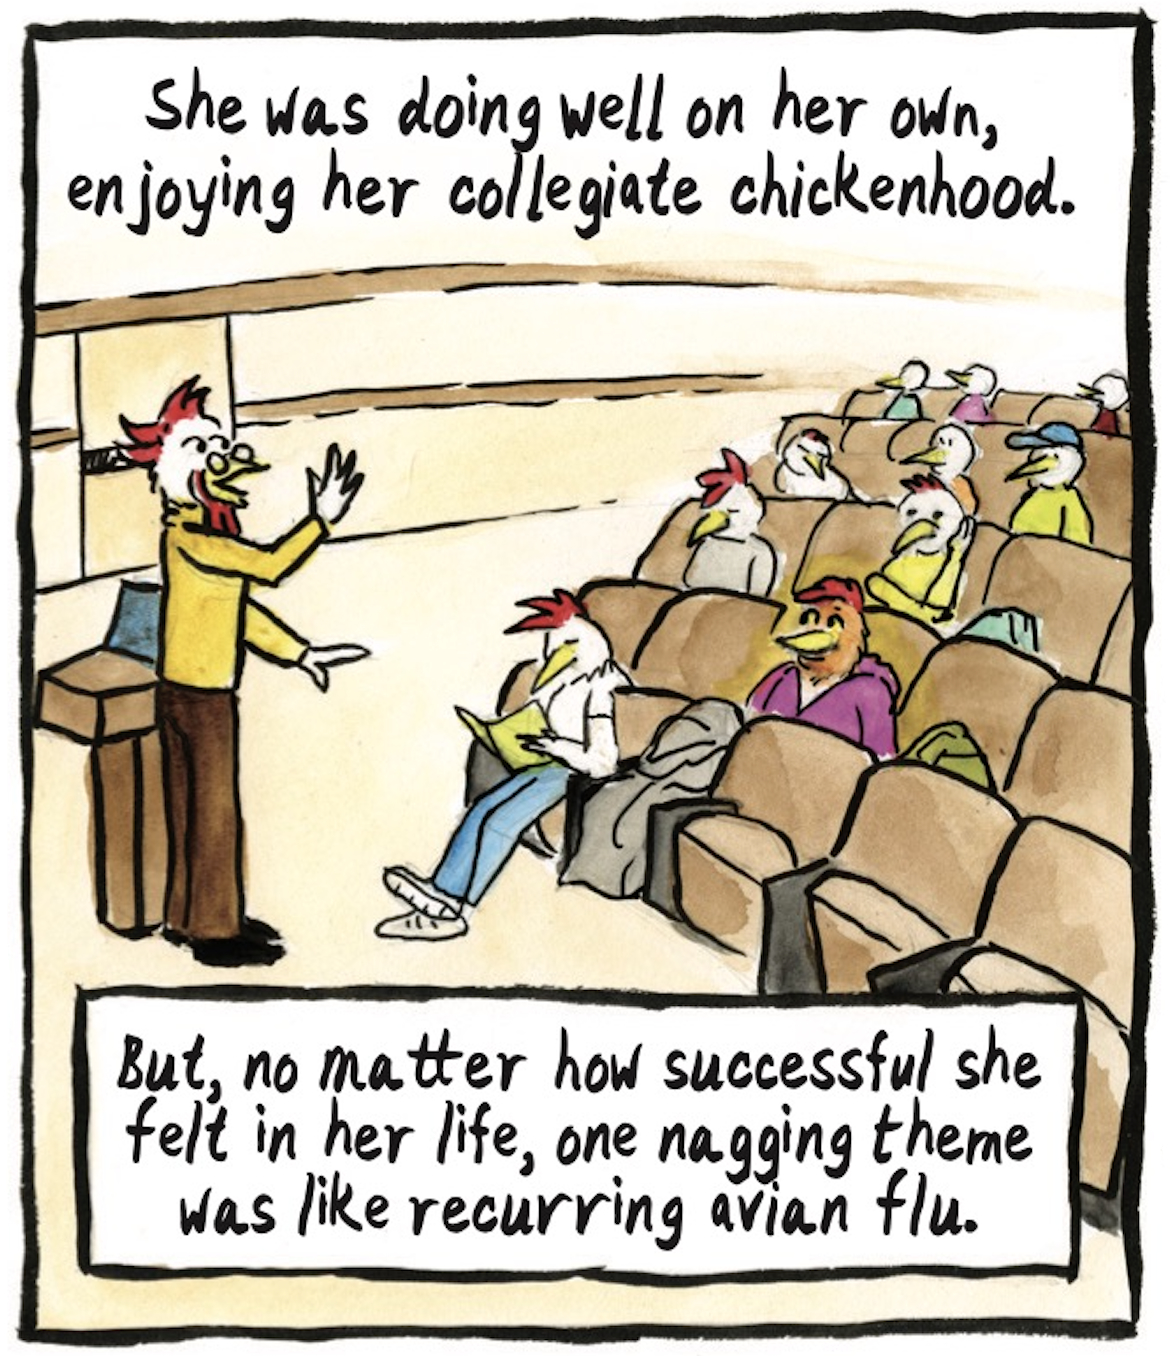 â€œShe was doing well on her own, enjoying her collegiate chickenhood. But, no matter how successful she felt in her life, one nagging theme was like recurring avian flu.â€ The red hen sits in a lecture hall listening to her professor.